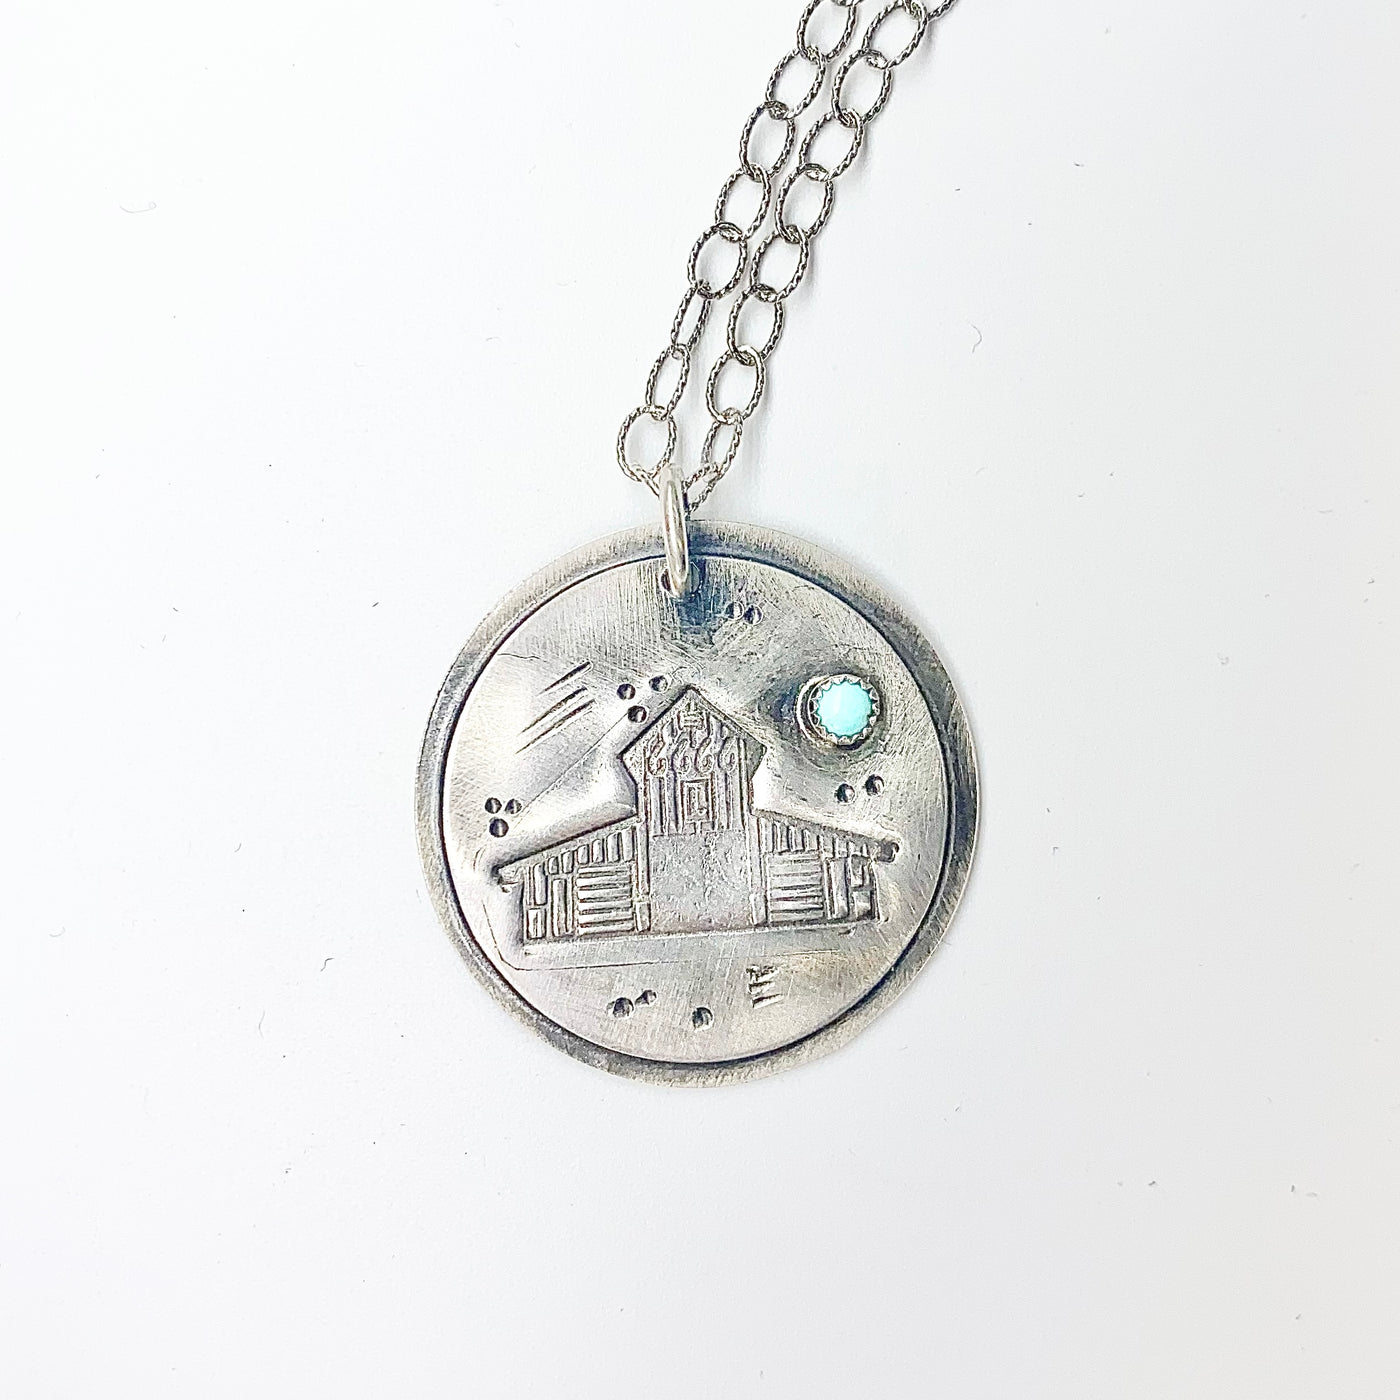 L Barn Necklace With Single Turquoise Inset on right